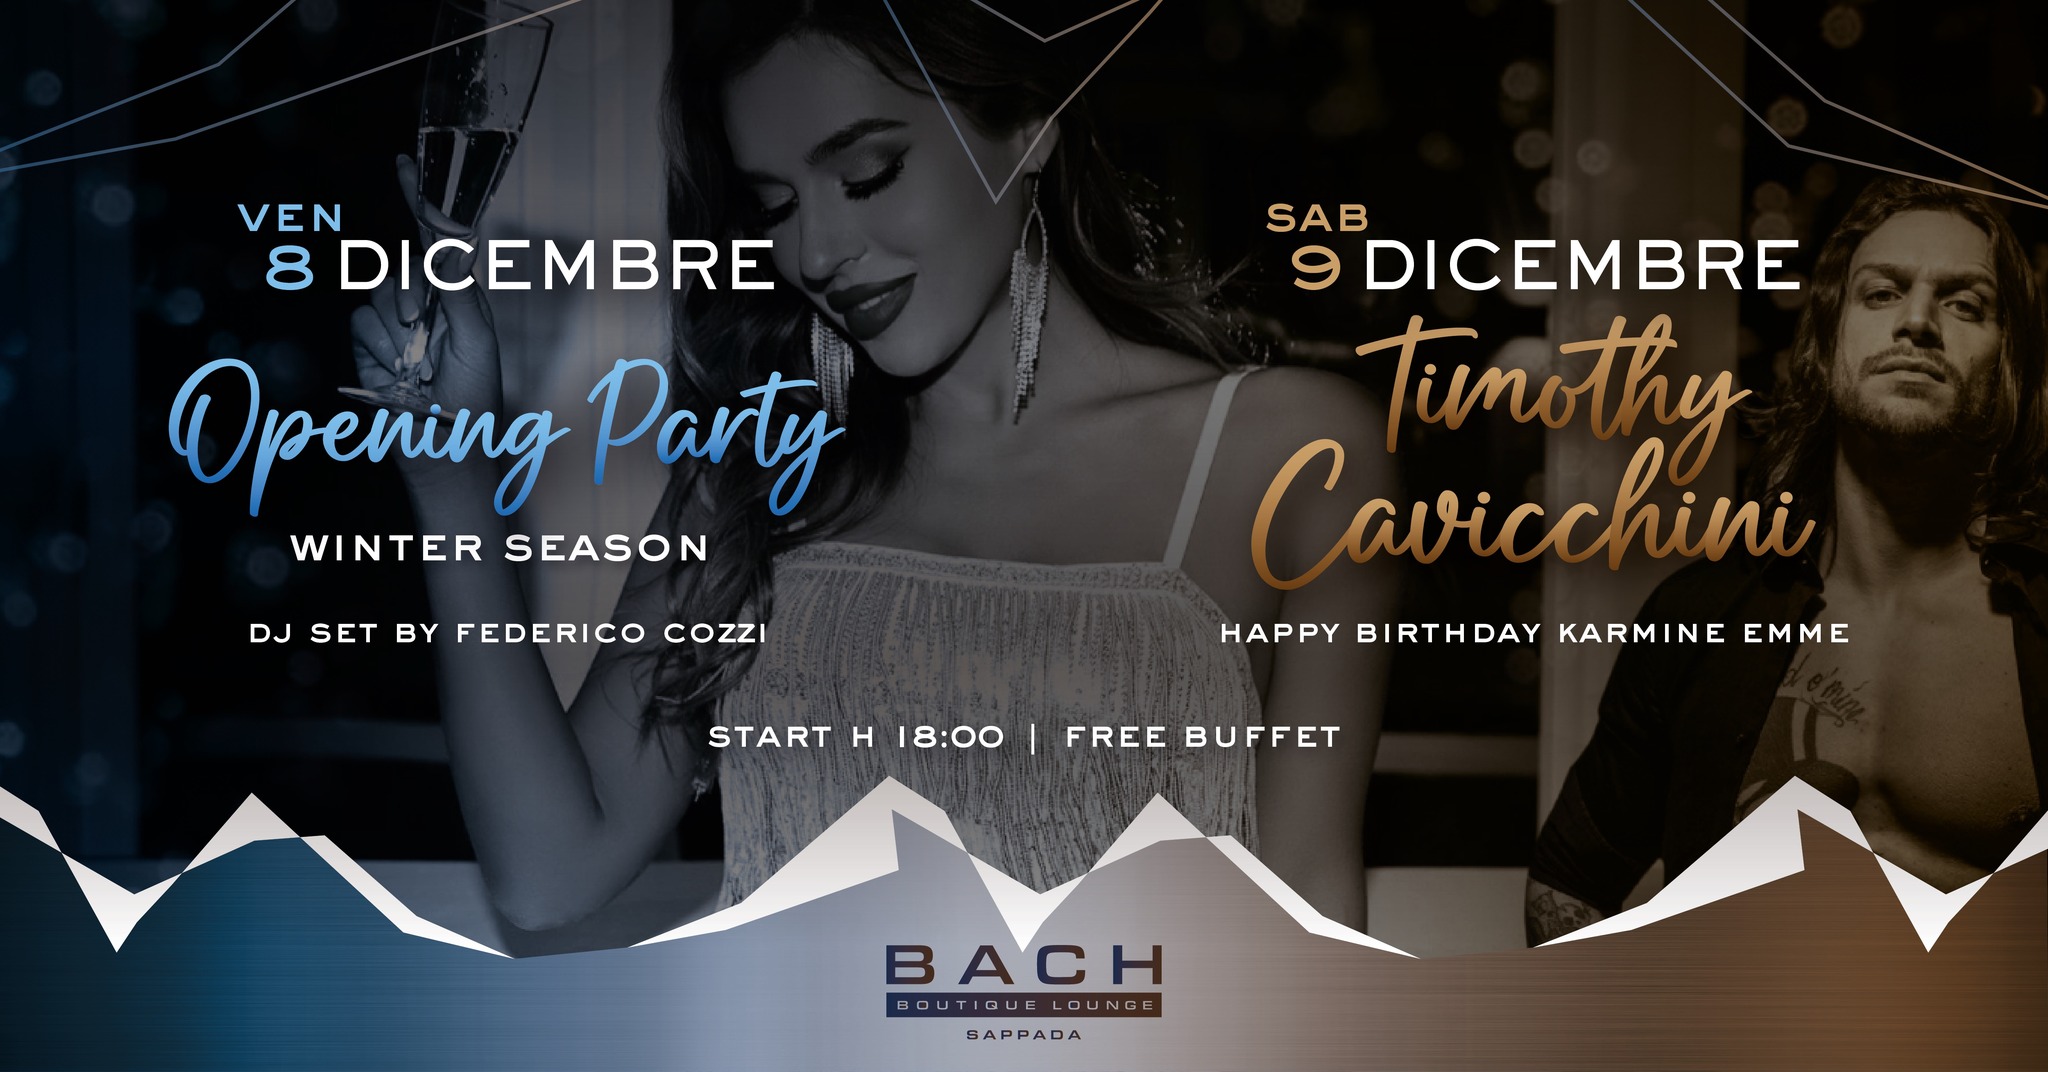 OPENING PARTY | 8.12 - 9.12 | Bach Boutique Hotel - EventiFVG.it